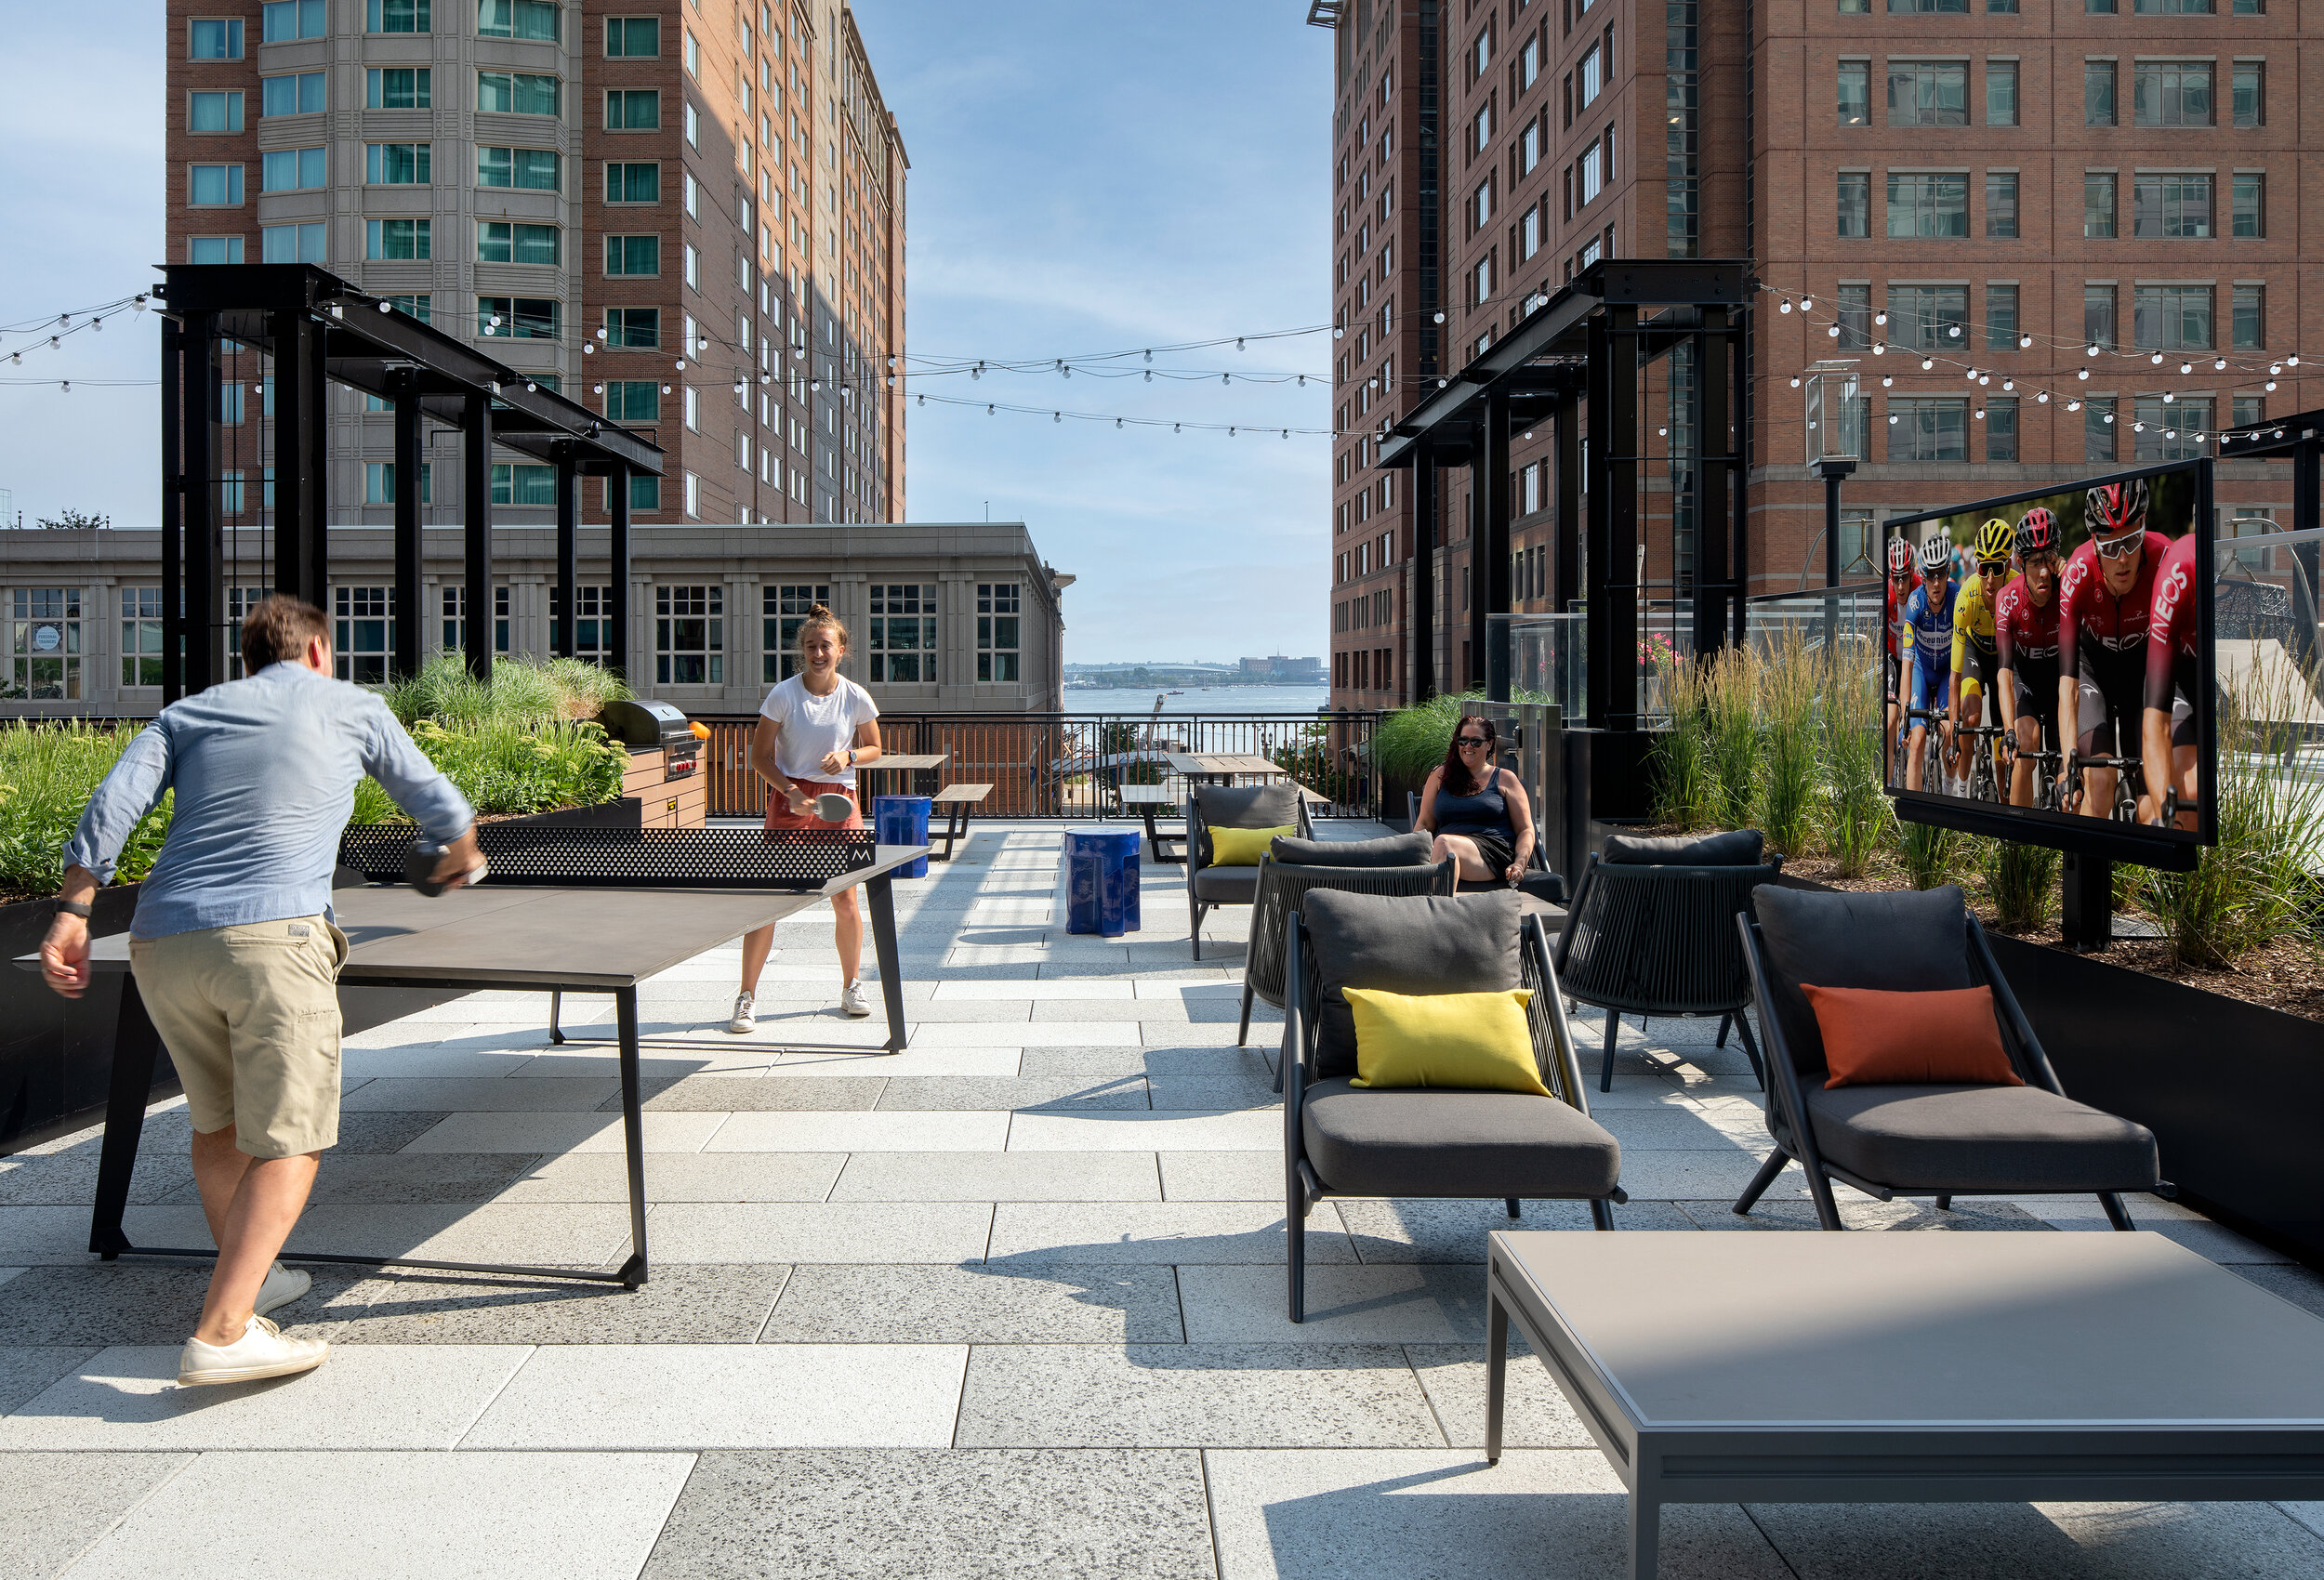  Outdoor table tennis and group seating at Gables Seaport Amenity Terrace (Photo by Ed Wonsek) 